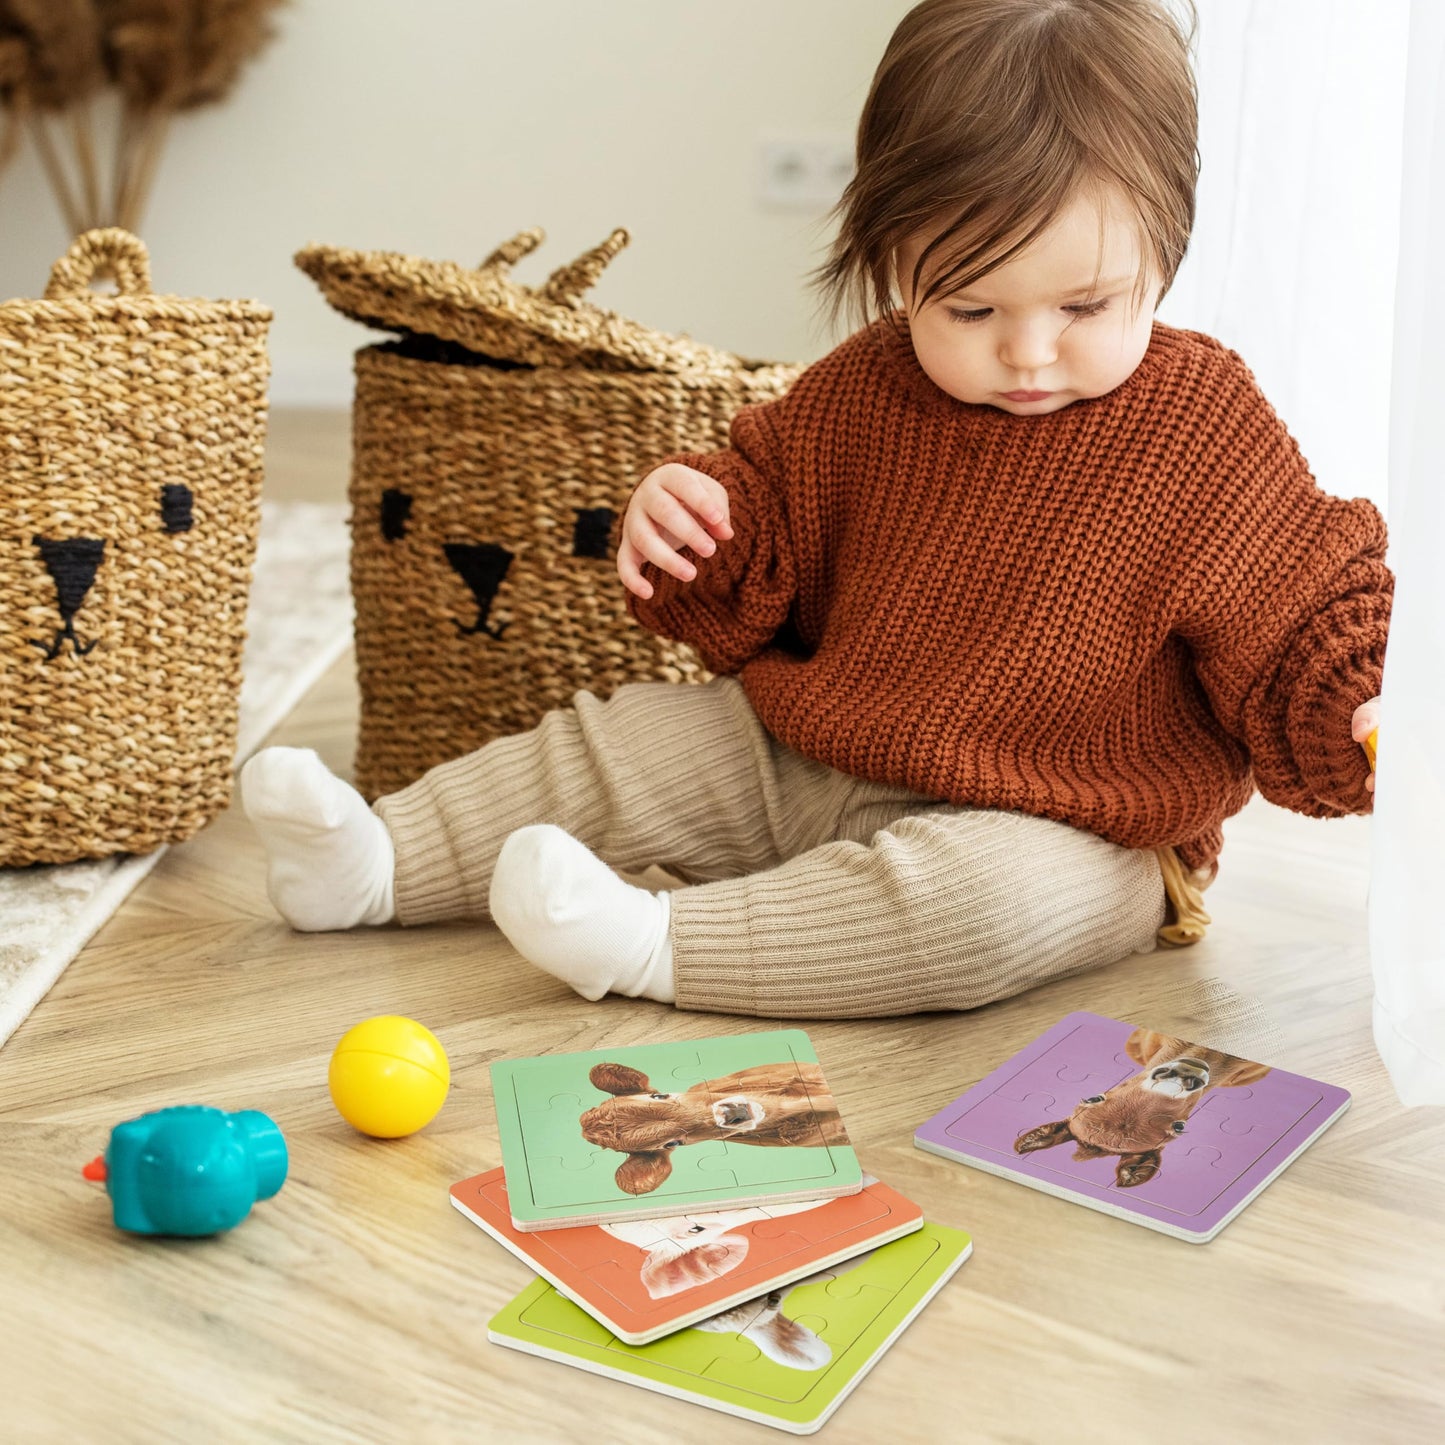 Fun Wooden Toddler Puzzle Set of 4 - Colorful Puzzles for Kids Aged 2-4 - Perfect Educational Learning Toy for Toddlers 1-3 to Develop Fine Motor Skills and Hand-Eye Coordination